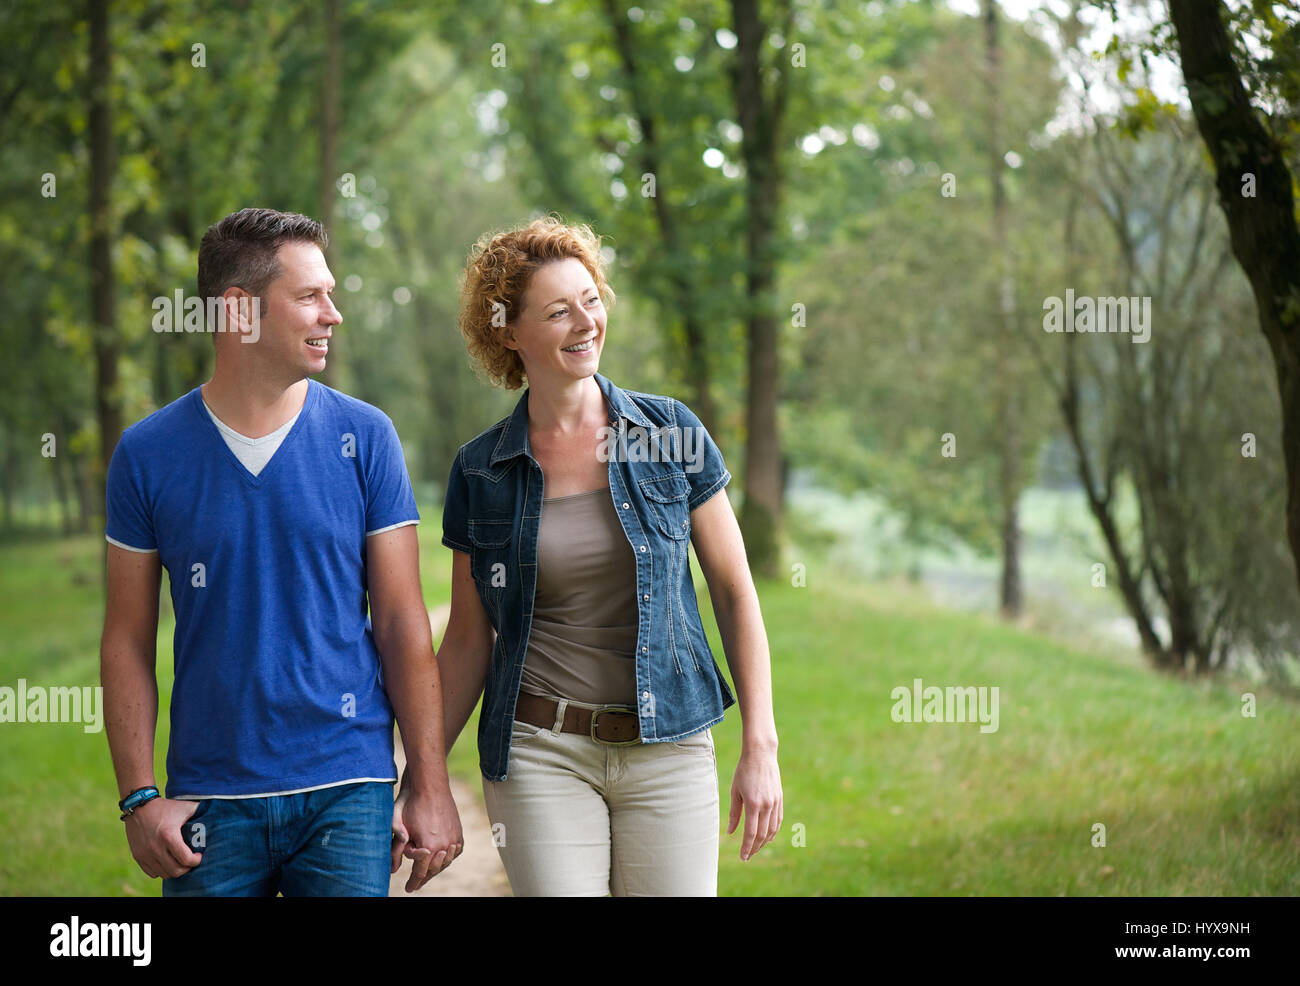 Portrait of a happy couple walking together outdoors Banque D'Images